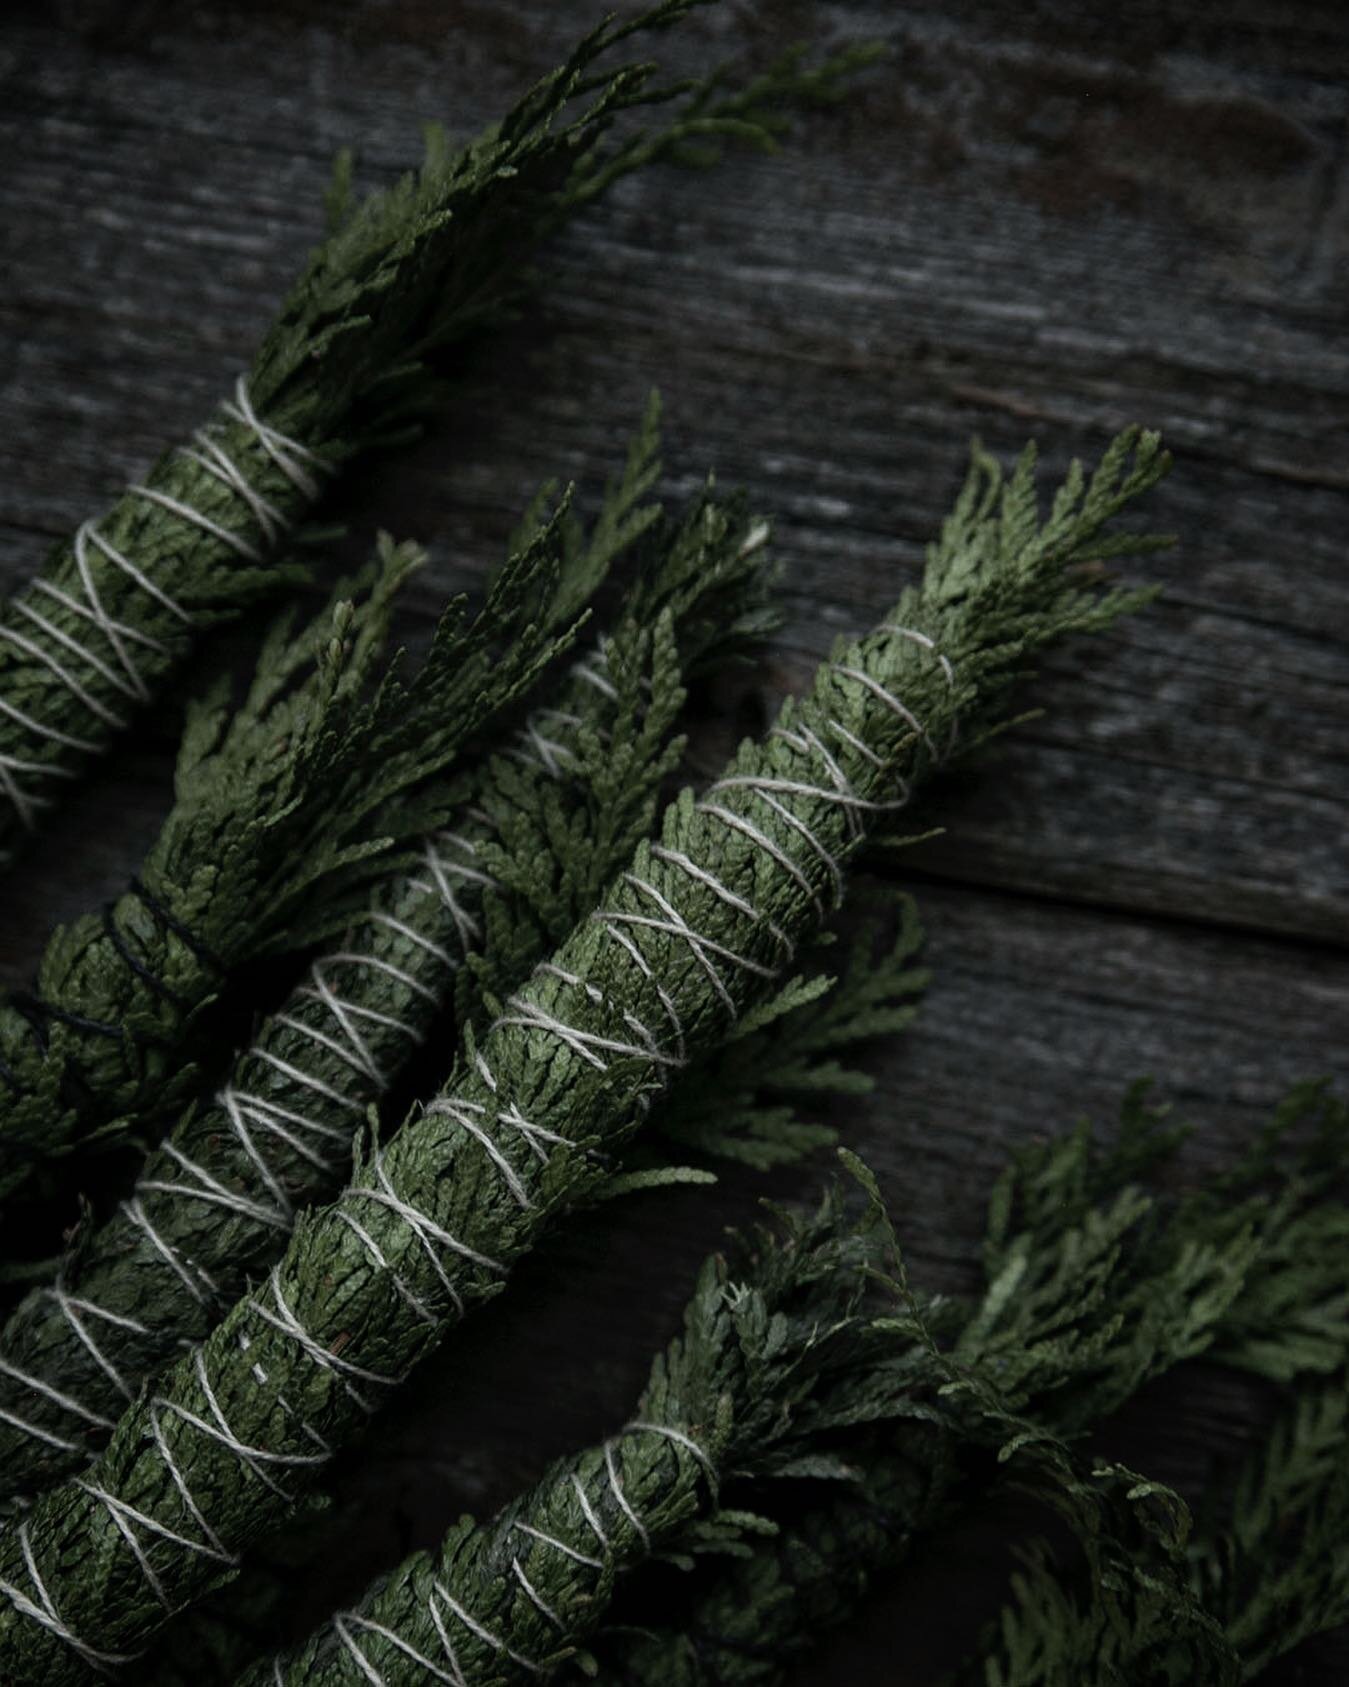 🌲 Cedar smoke wands are back in stock! 🔥 Burning cedar is great for protection and purification but can also help with healing, as well as wealth and prosperity. 🌲

 

 

 

 

 

 

 

 

 

 
⠀⠀⠀⠀⠀⠀⠀⠀⠀⠀⠀⠀⁣⁣

#cedar #pnw #cedarwood #pine #evergre